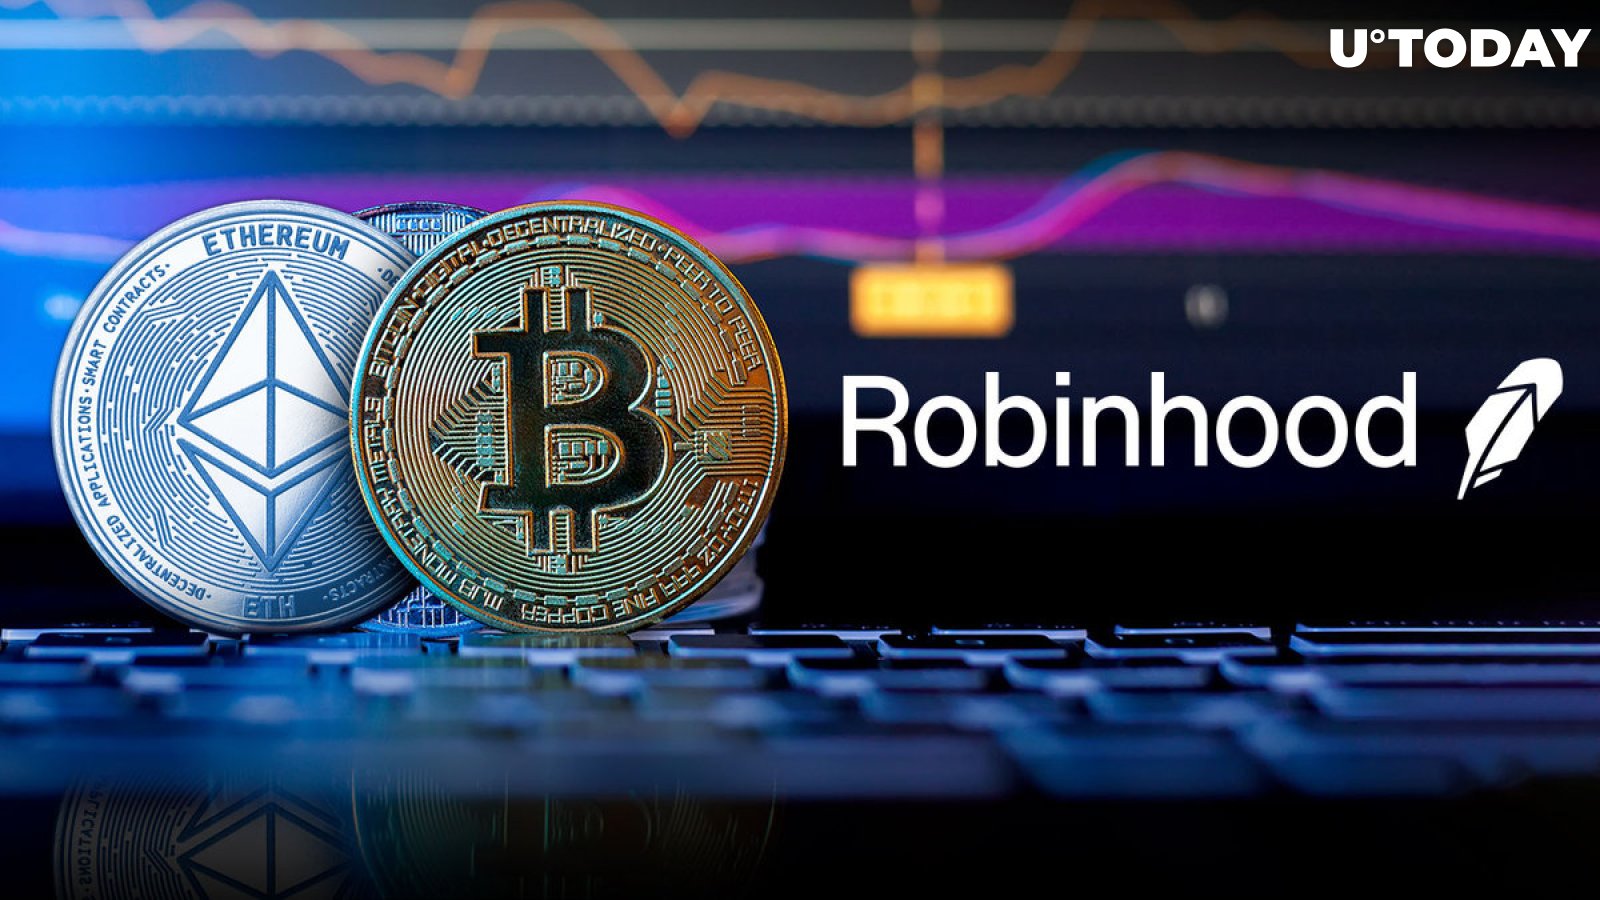 Robinhood's 14% Unexpected Shift From Ethereum to Bitcoin Rattles Markets